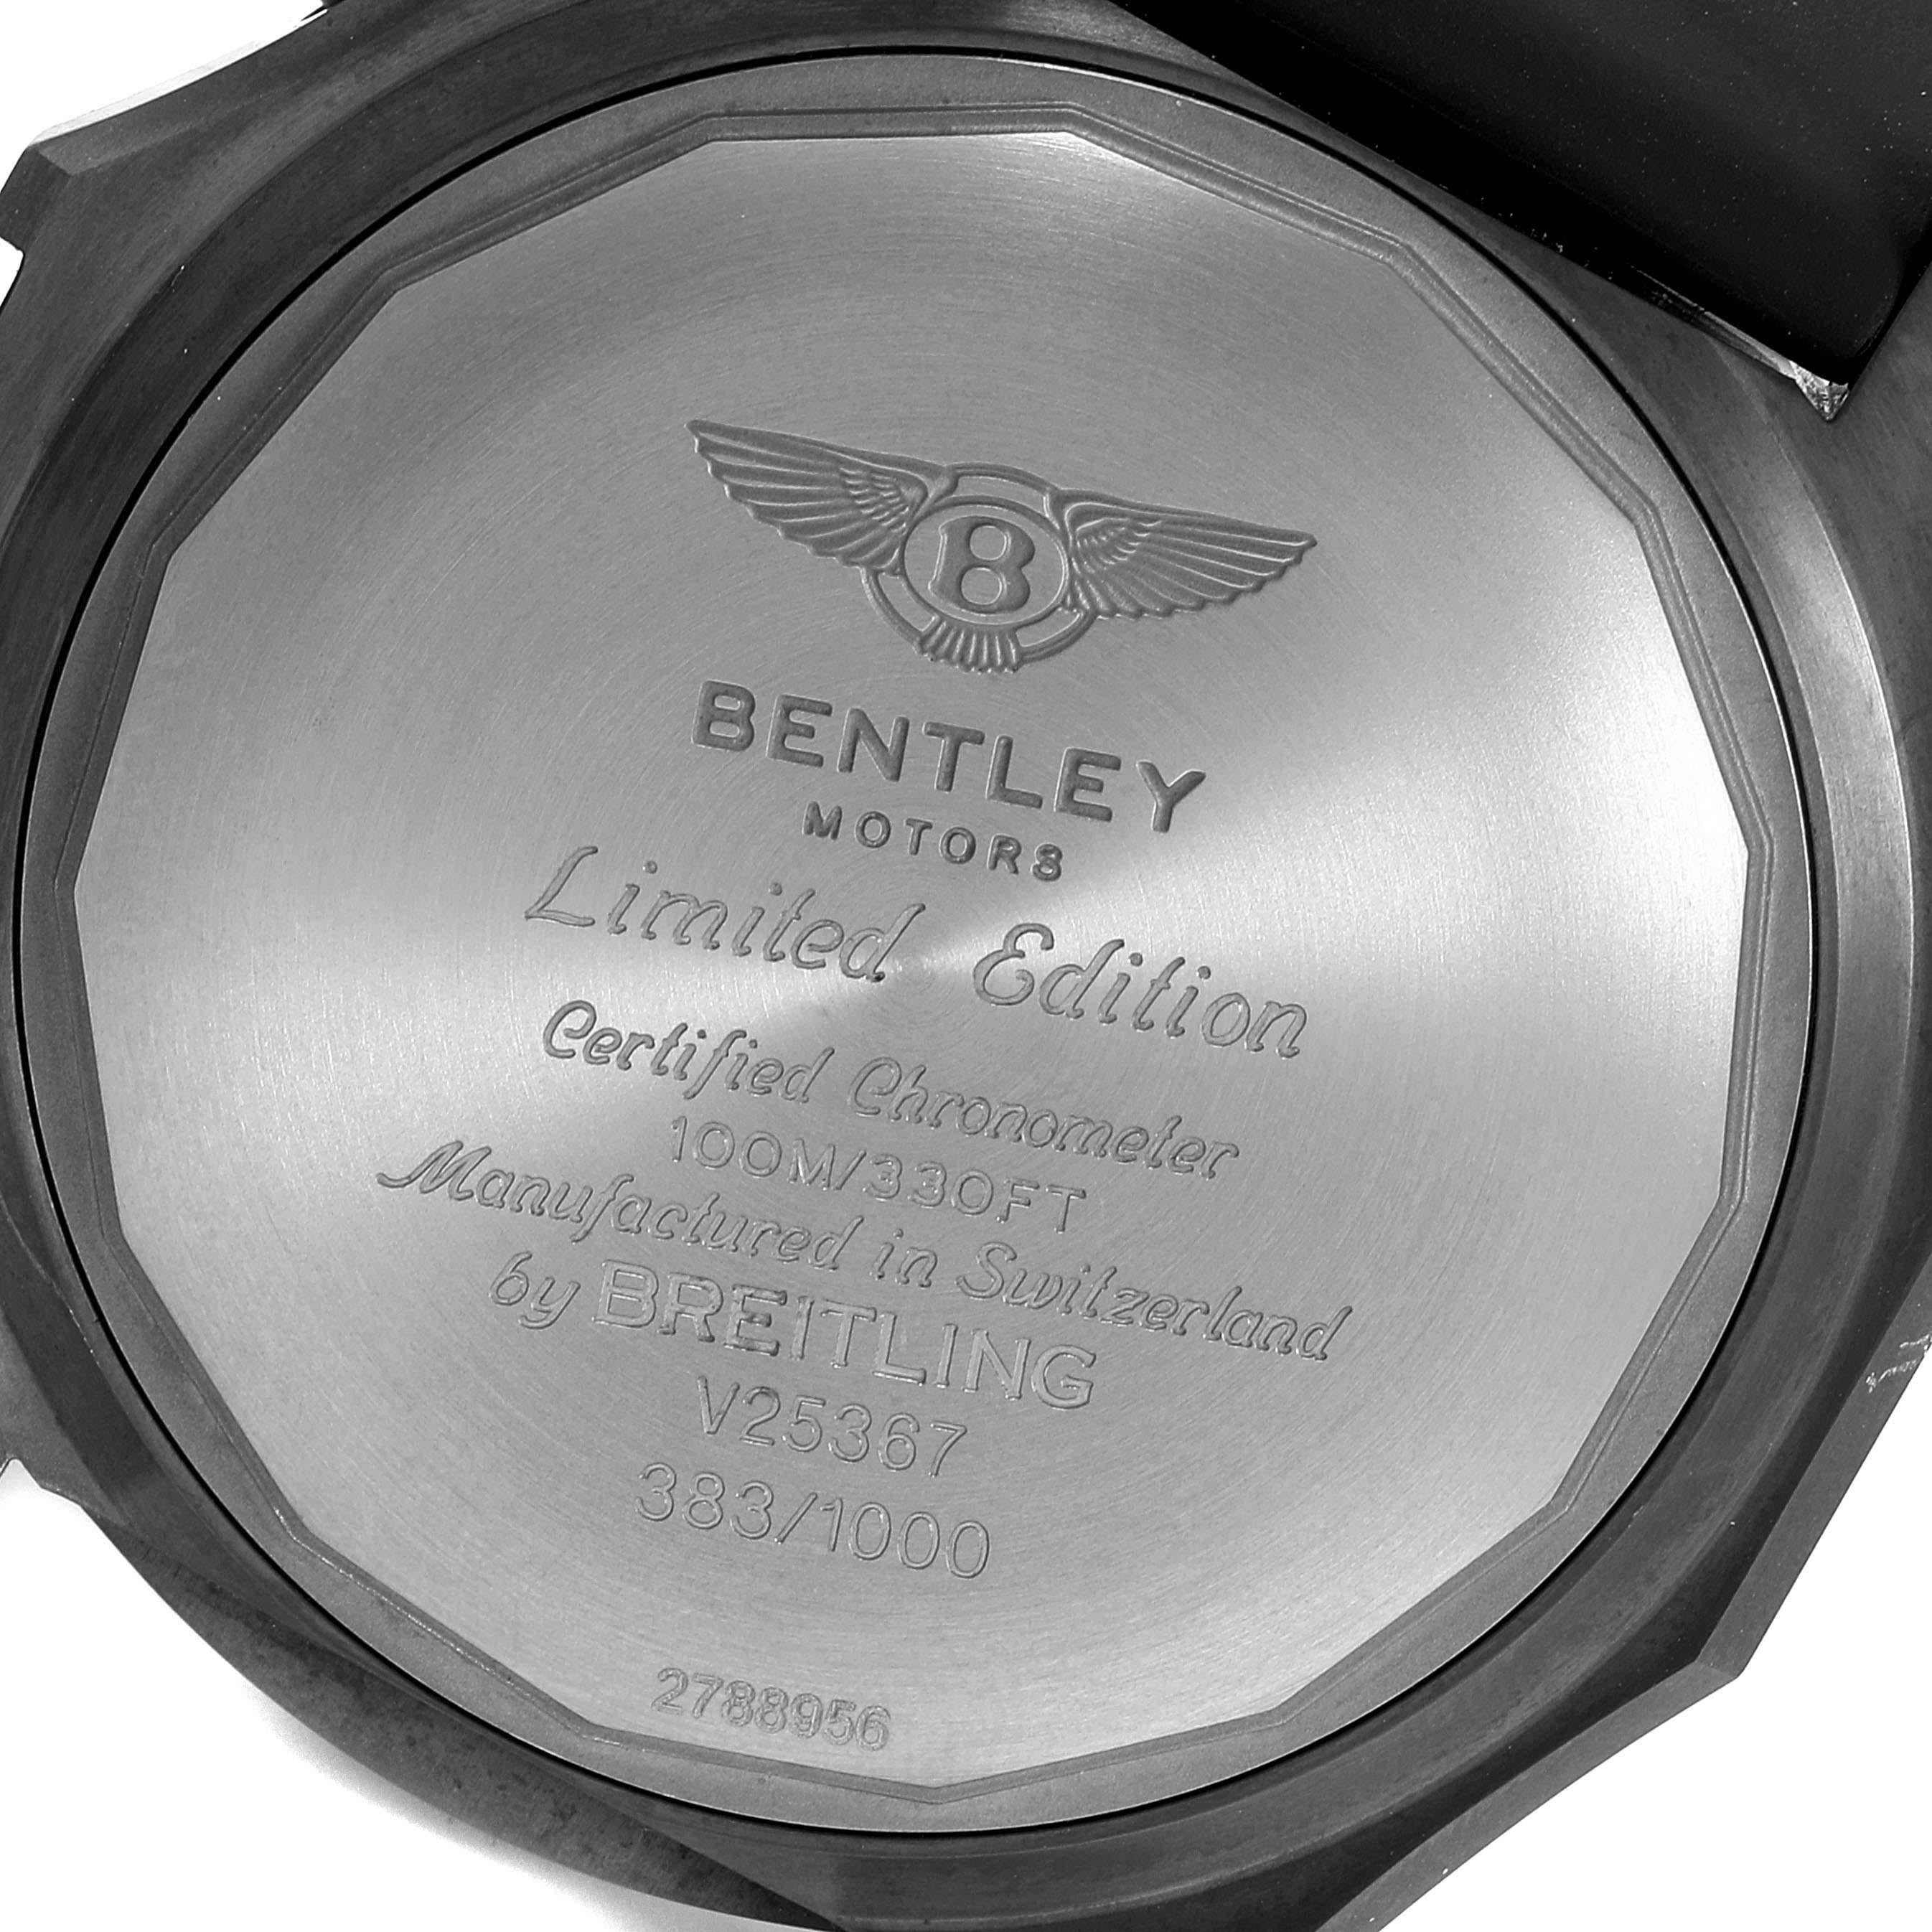 Men's Breitling Bentley Light Body Midnight Carbon Rubber Strap LE Watch V25367 For Sale